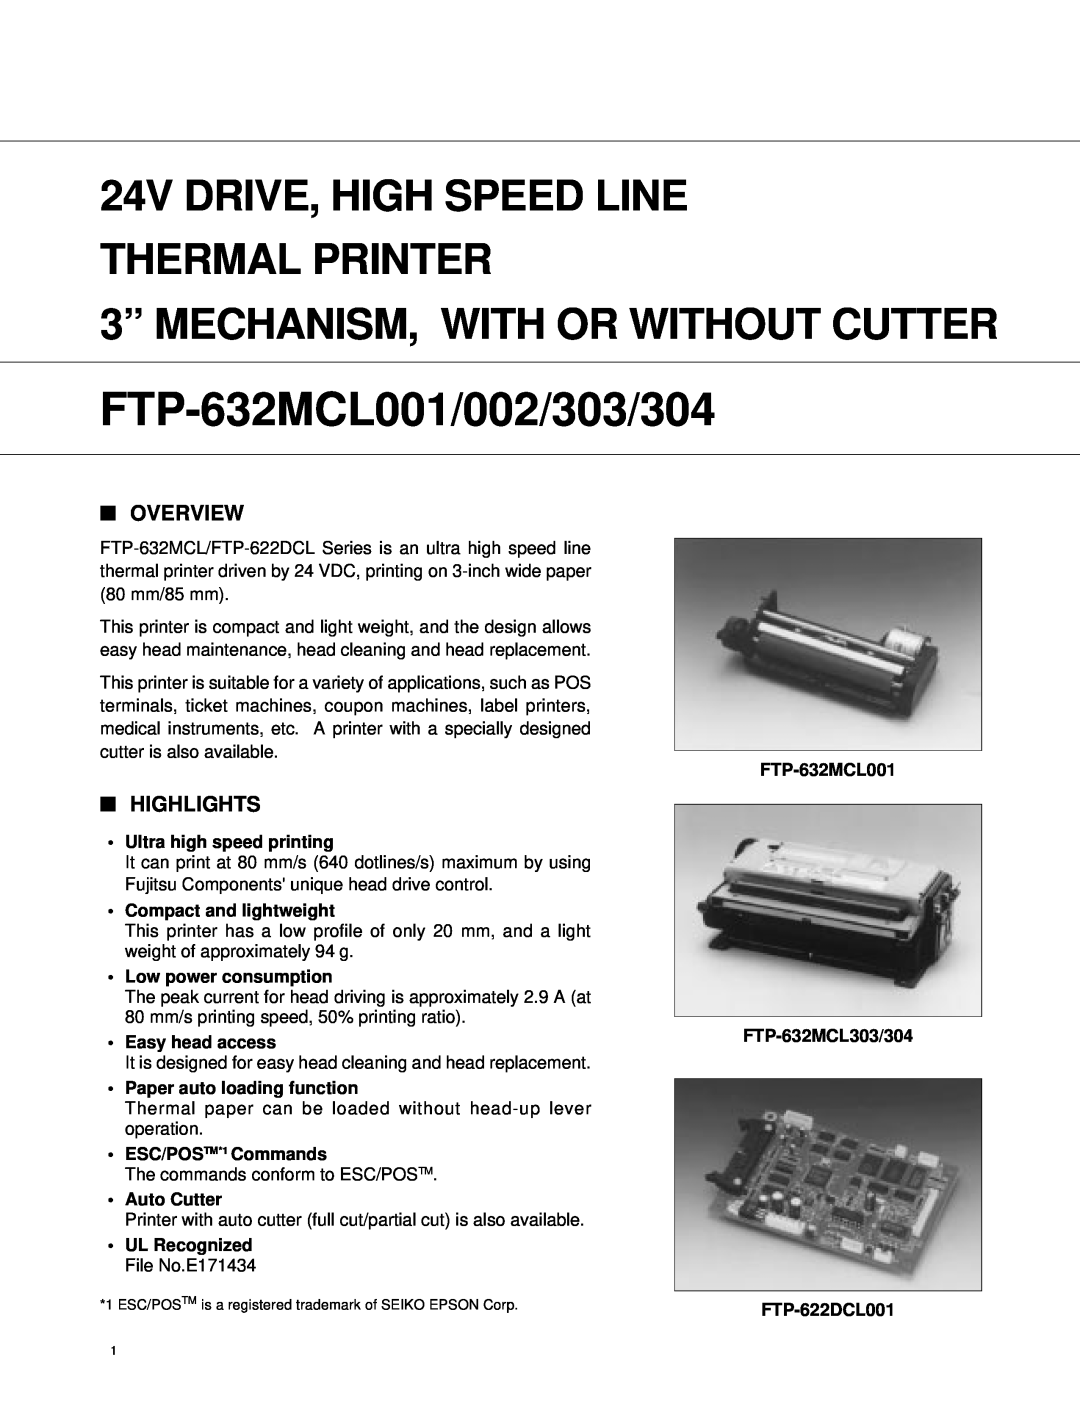 Fujitsu FTP-632MCL004 manual Overview, Highlights, Ultra high speed printing, Compact and lightweight, Easy head access 